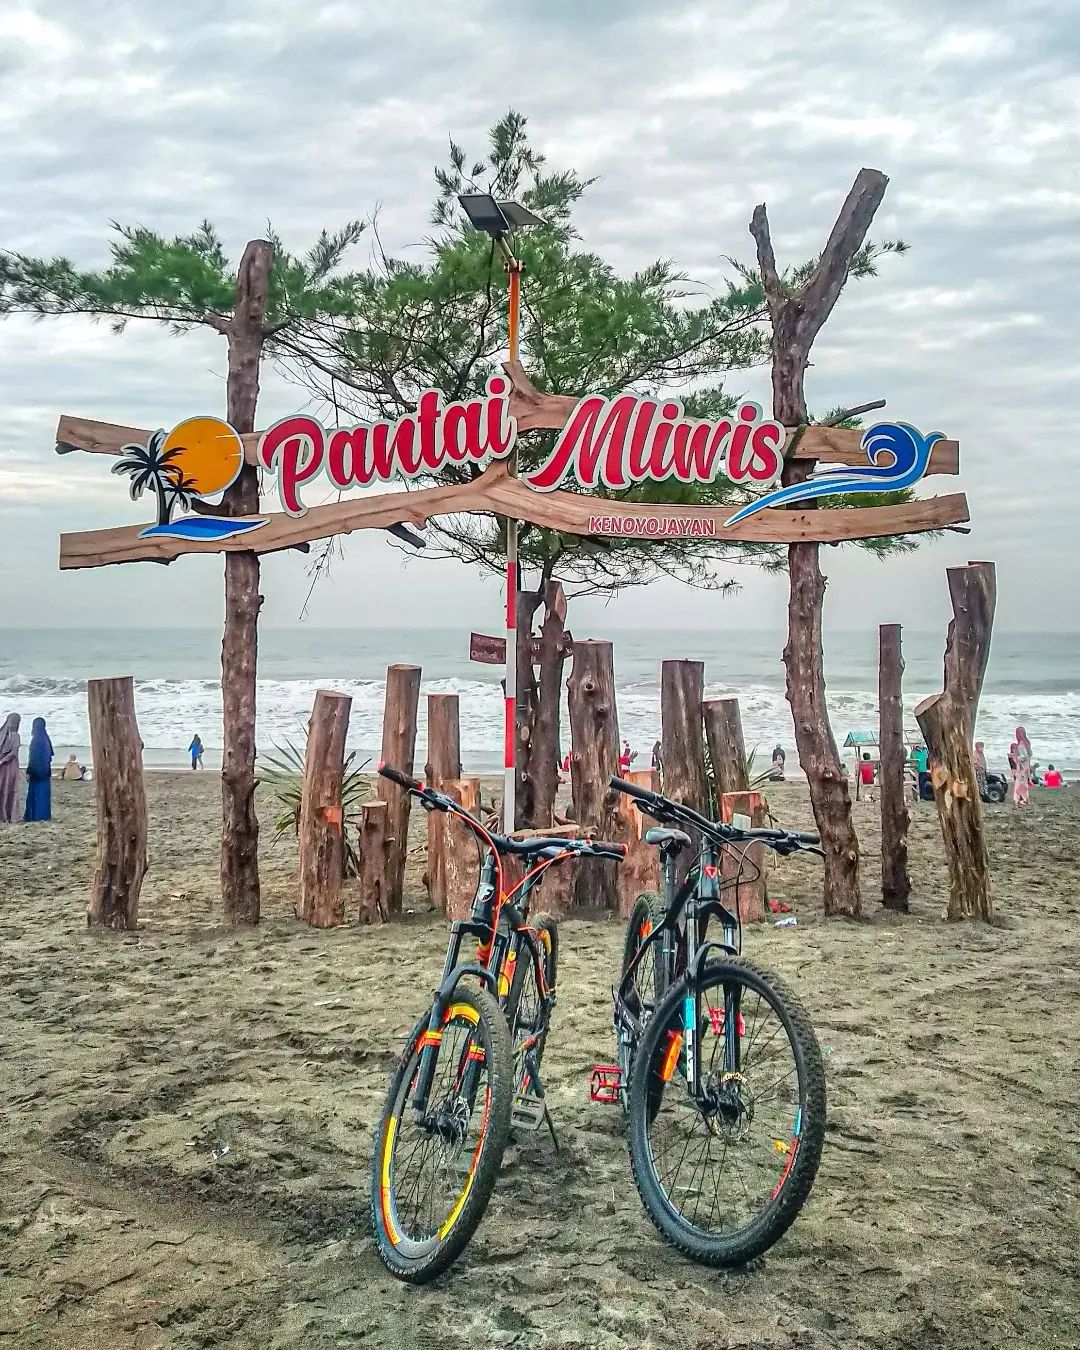 Review Pantai Mliwis Kebumen Image From @_wii In_